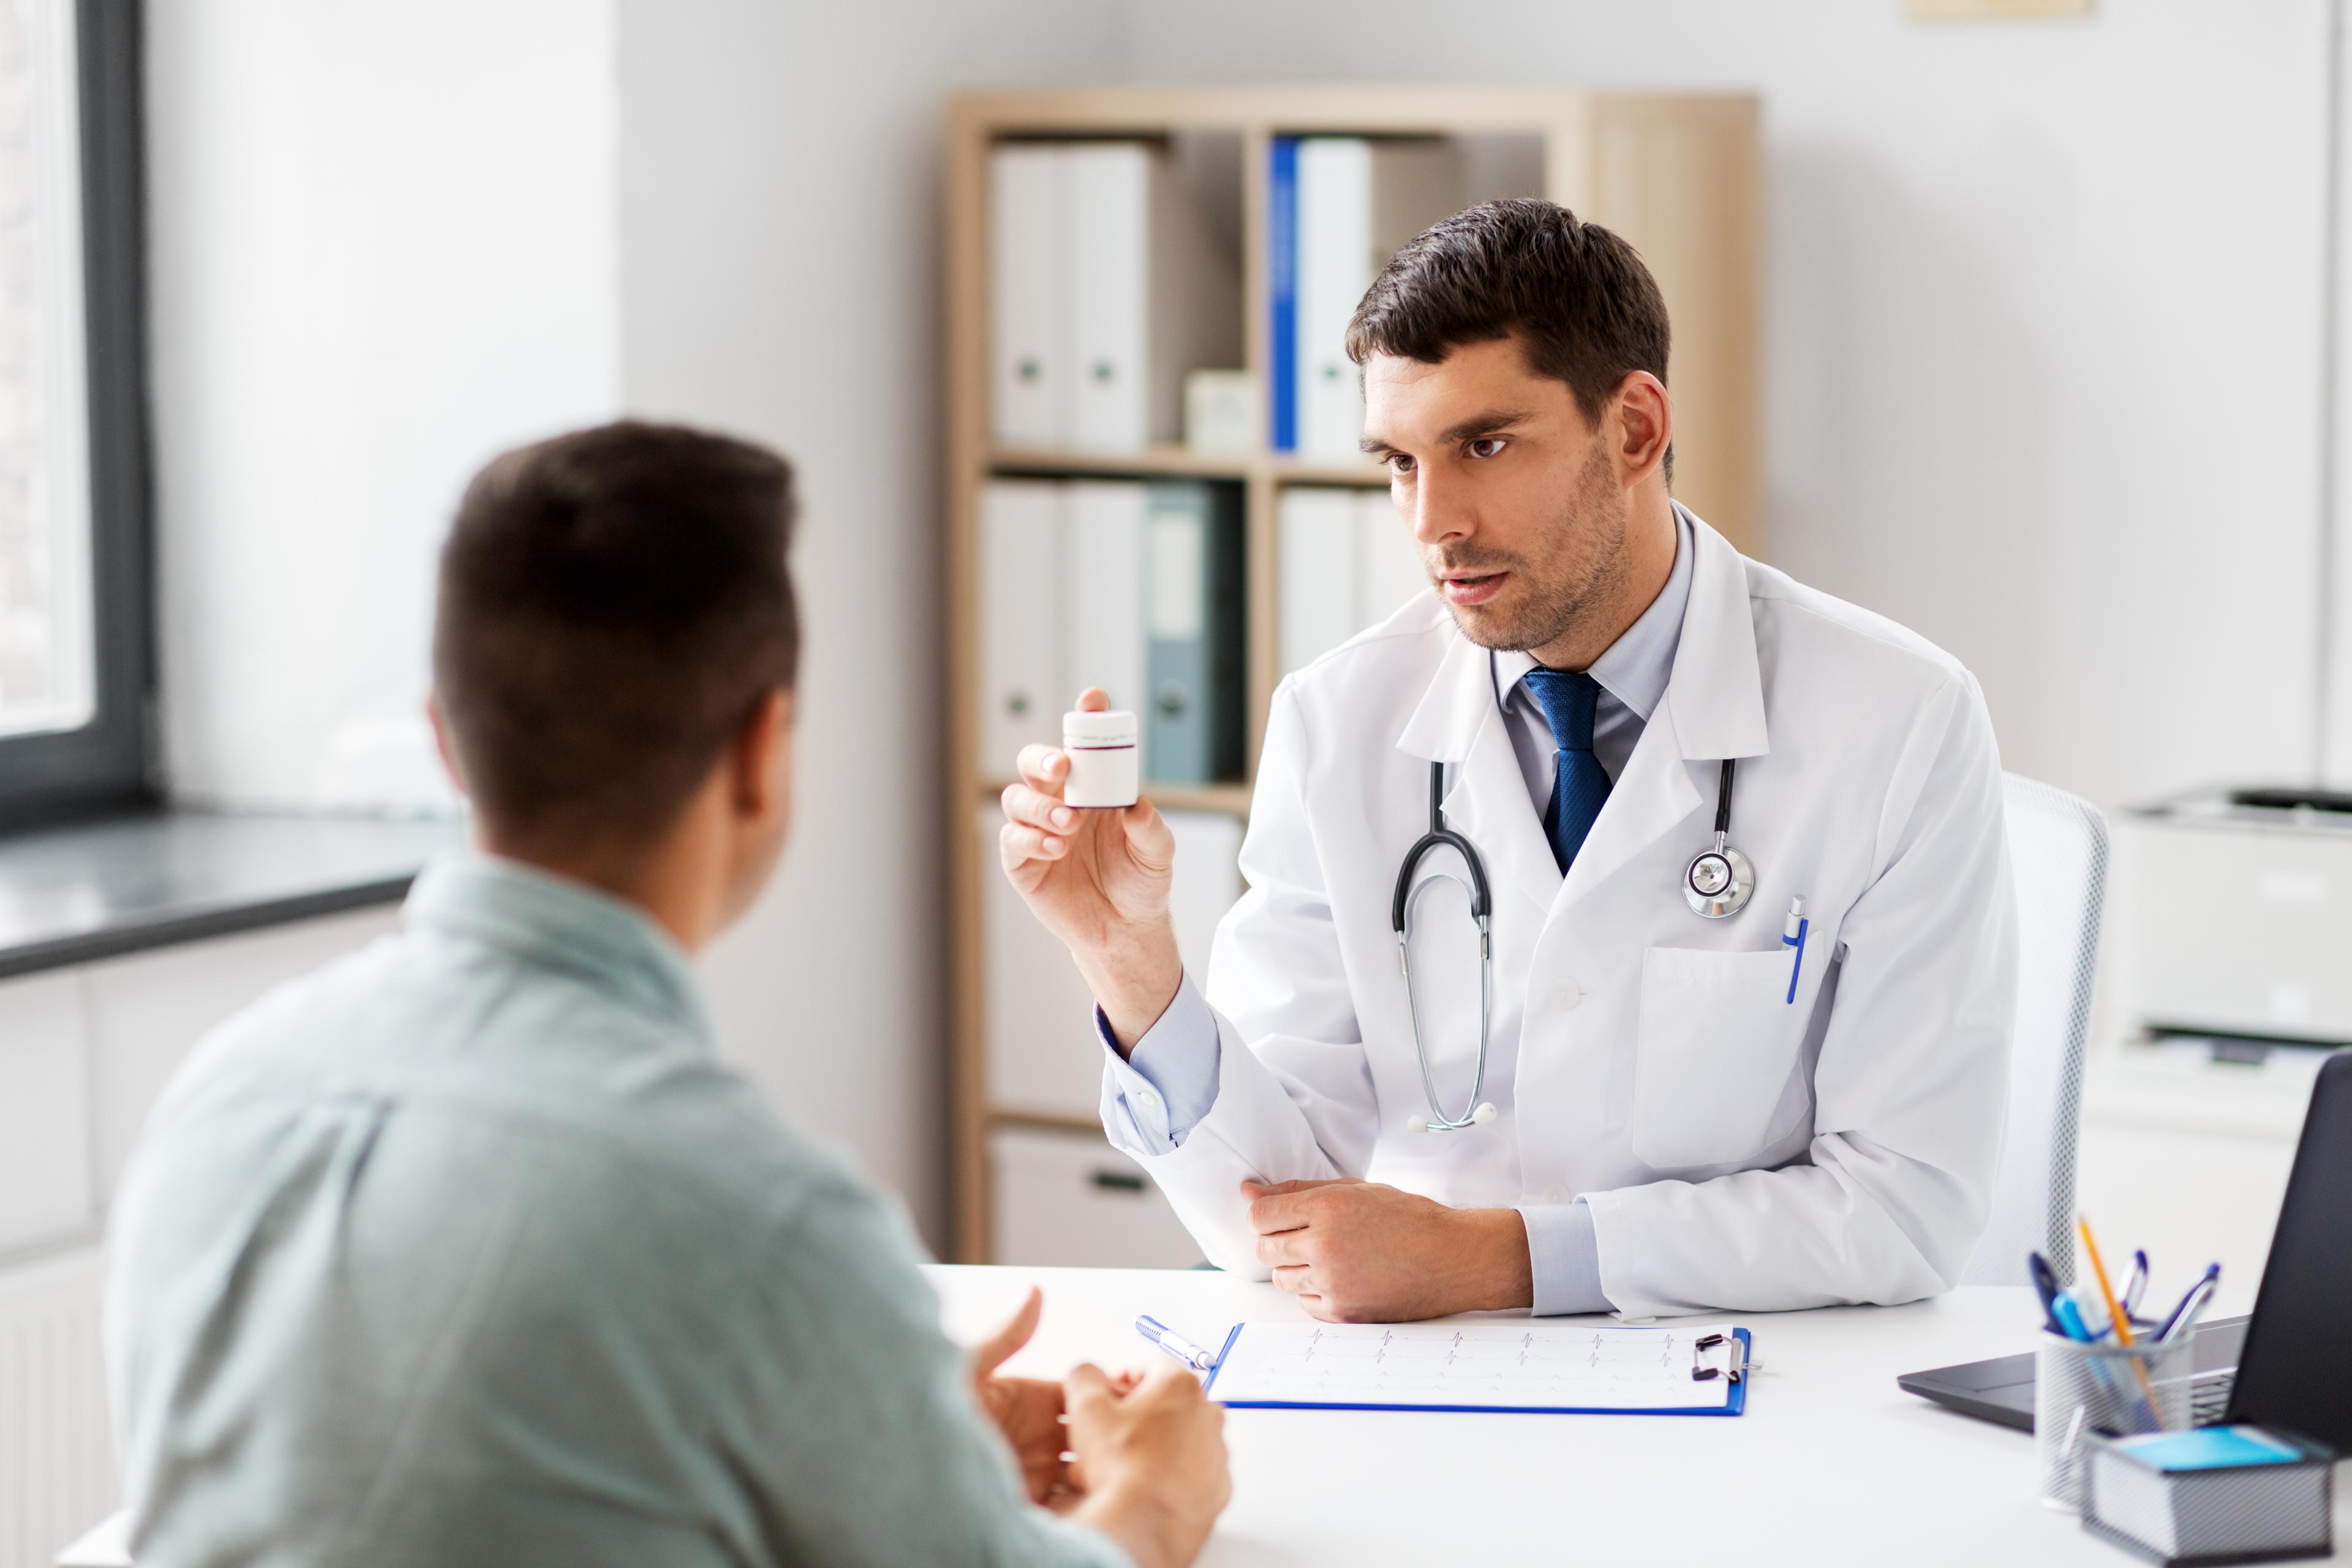 Young male doctor consulting with male patient facing away from camera; clinical setting